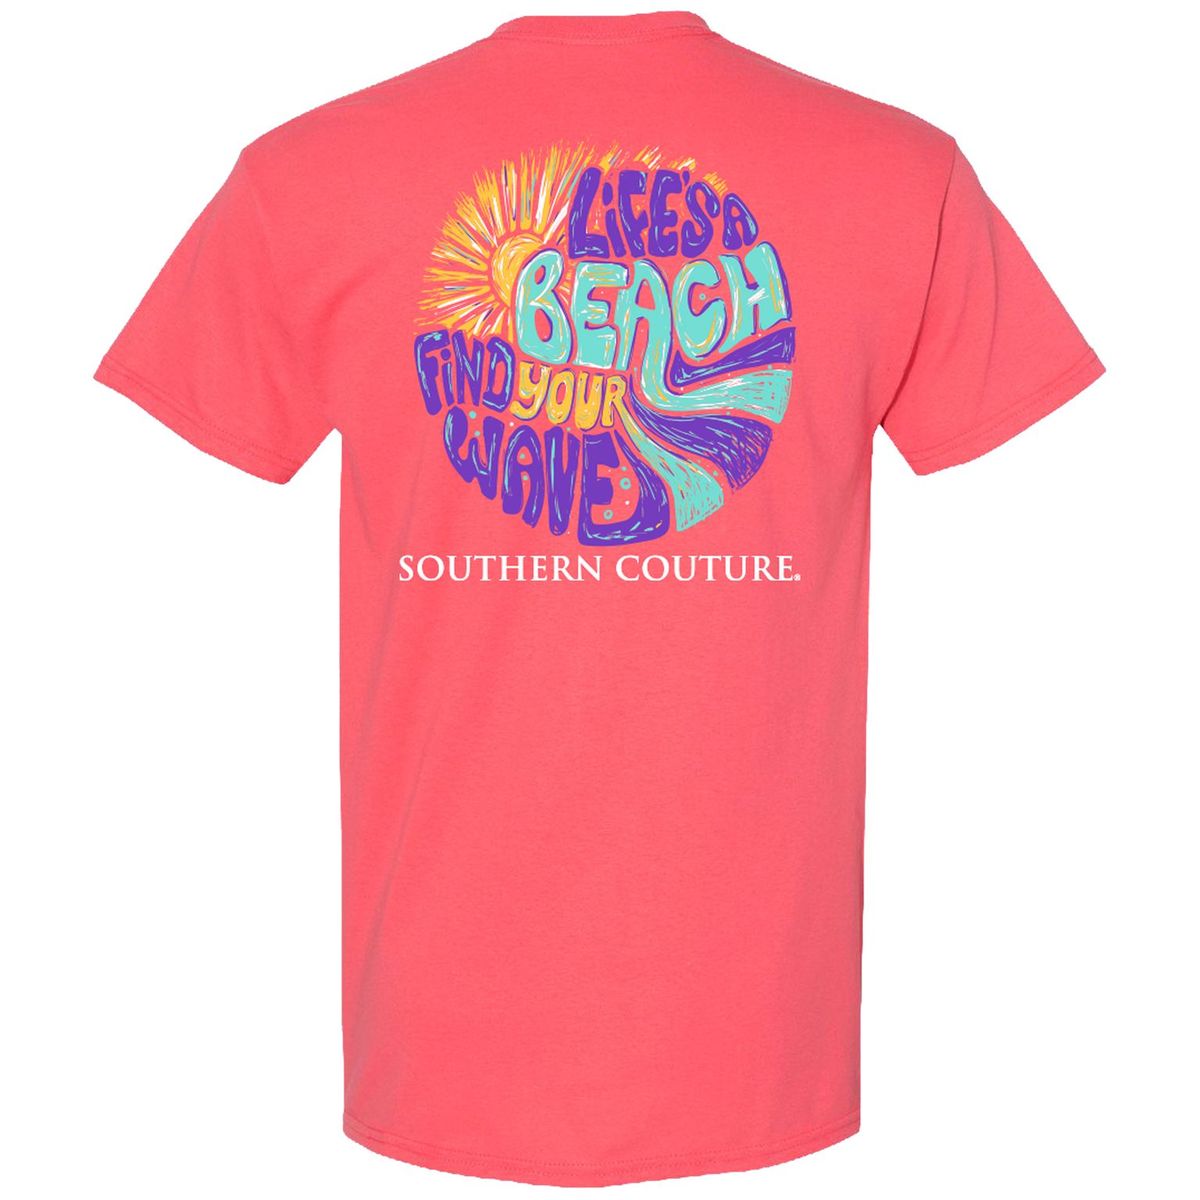 Southern Couture Classic Life's A Beach T-Shirt